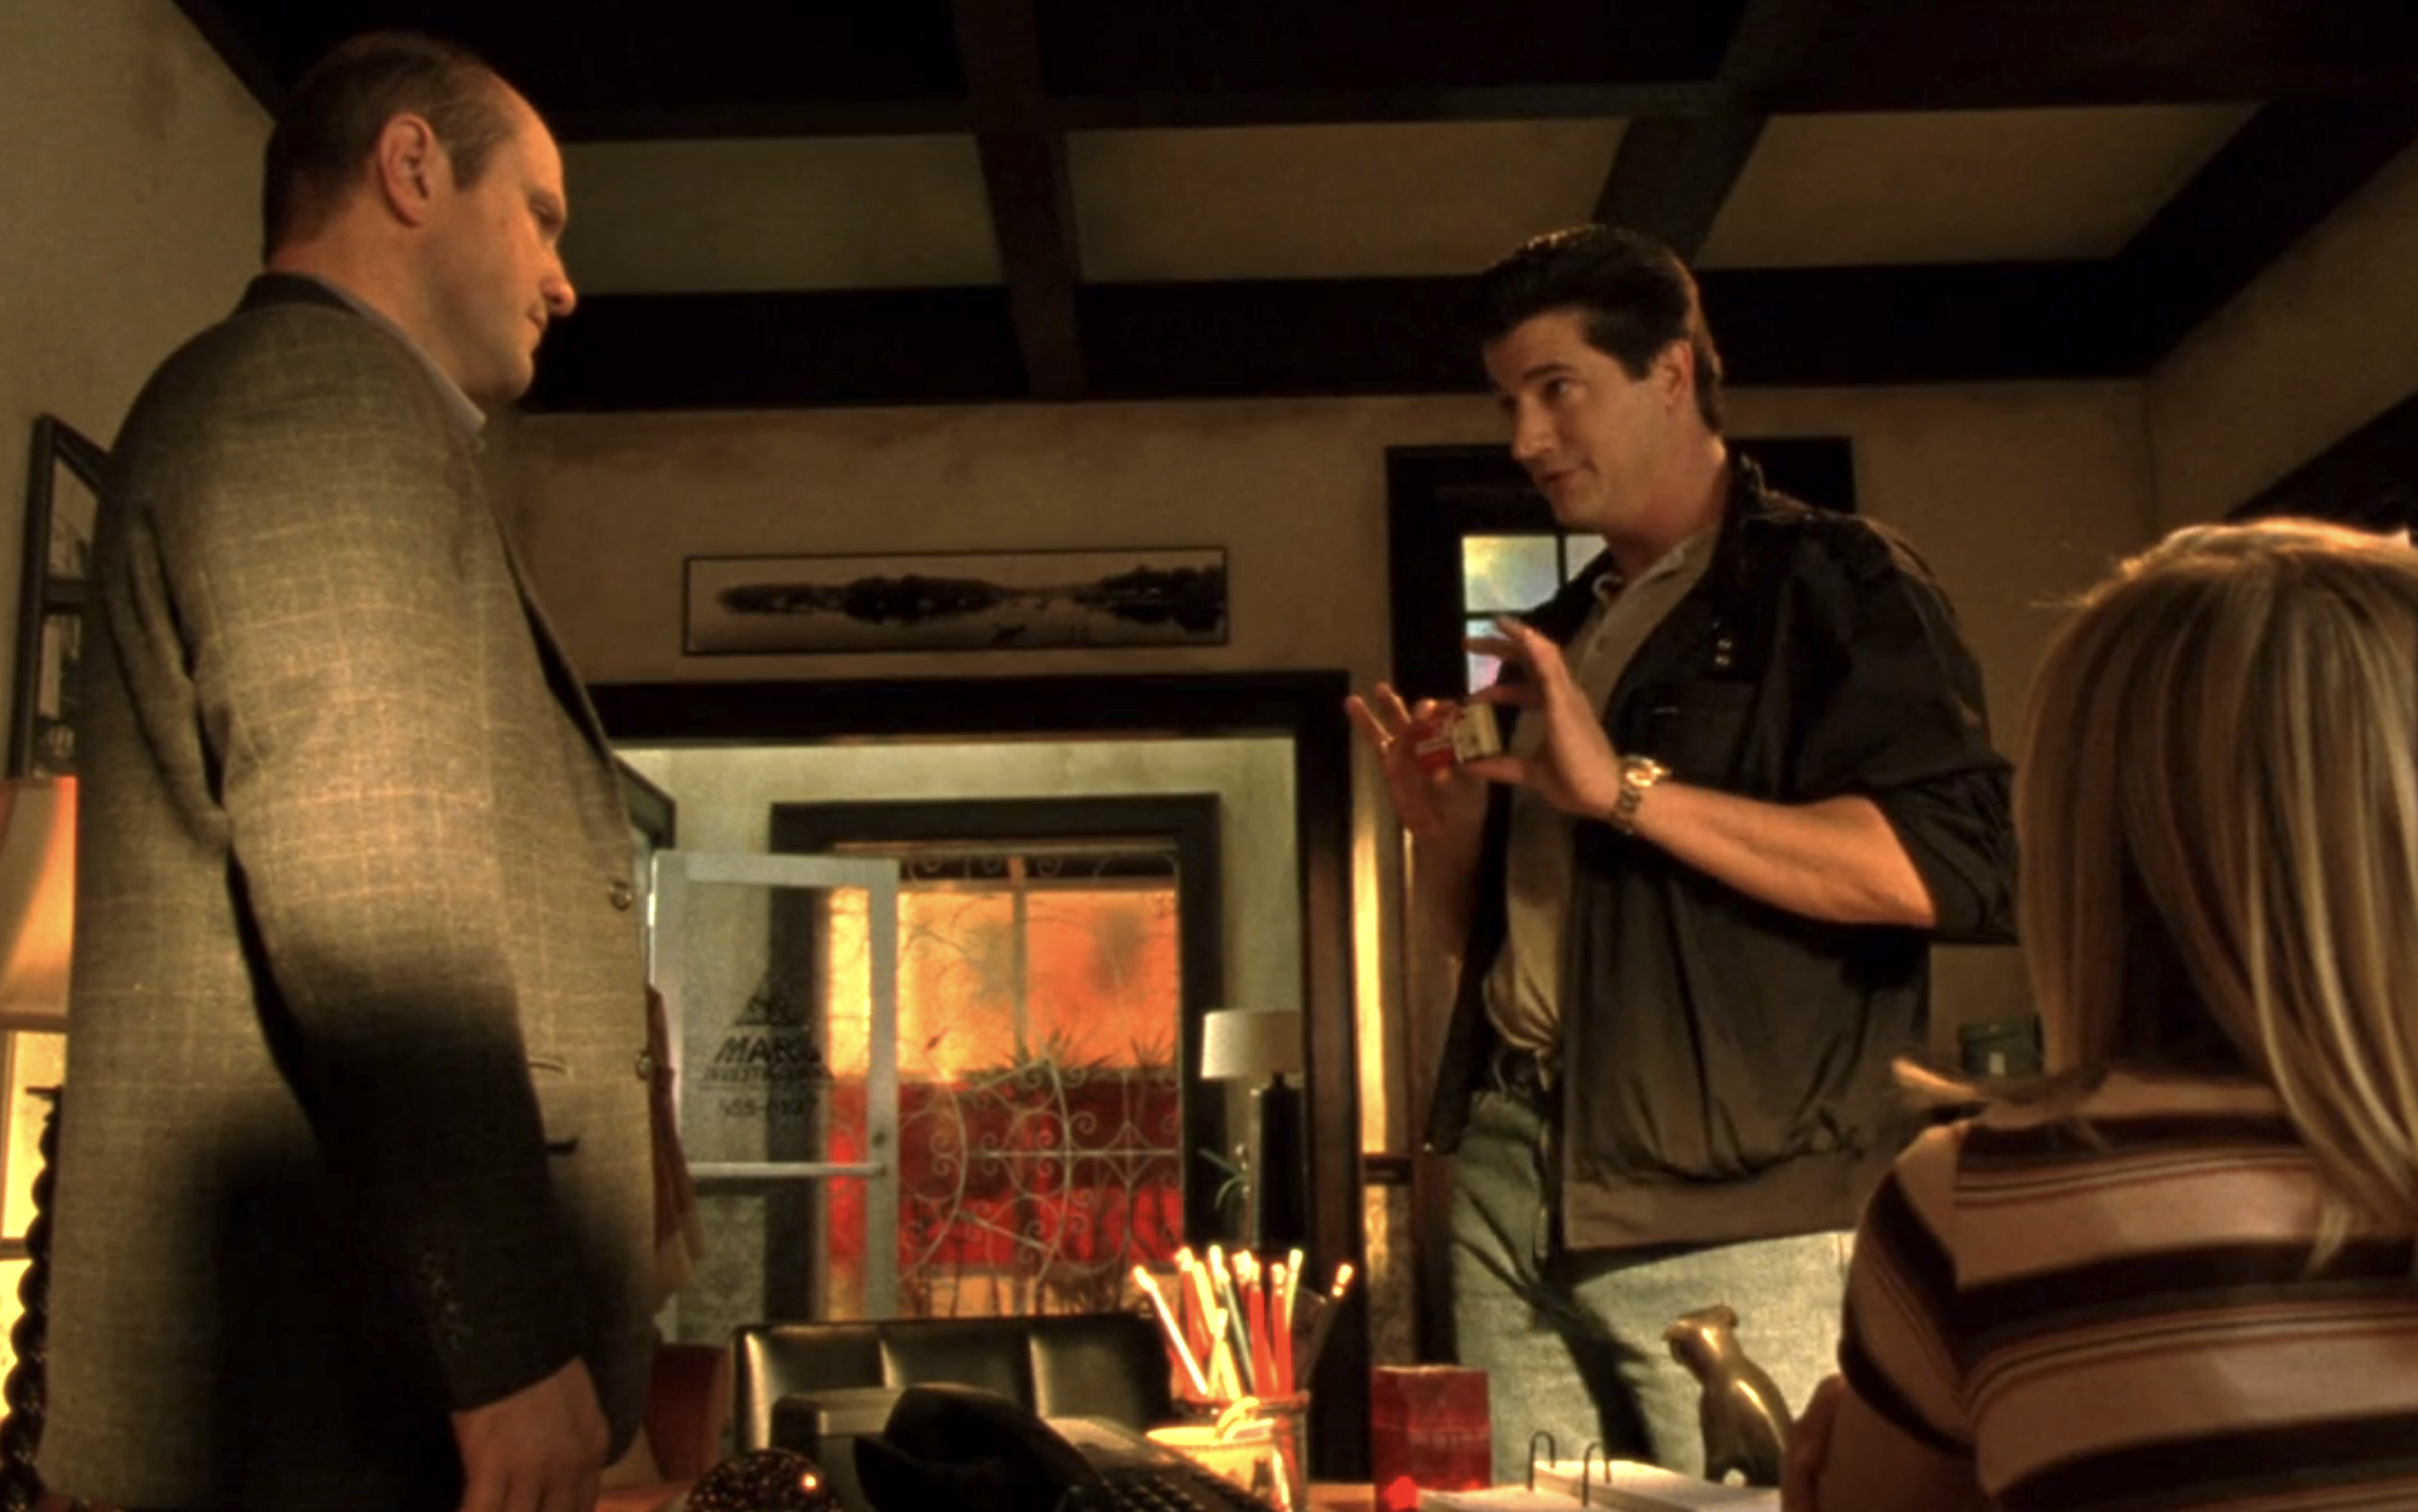 Screenshot from S1E17 of Veronica Mars. Keith and Vinny are standing in Mars Investigations. Veronica is seated, her back to the viewer. Vinny is holding his business card out to show it to Keith.